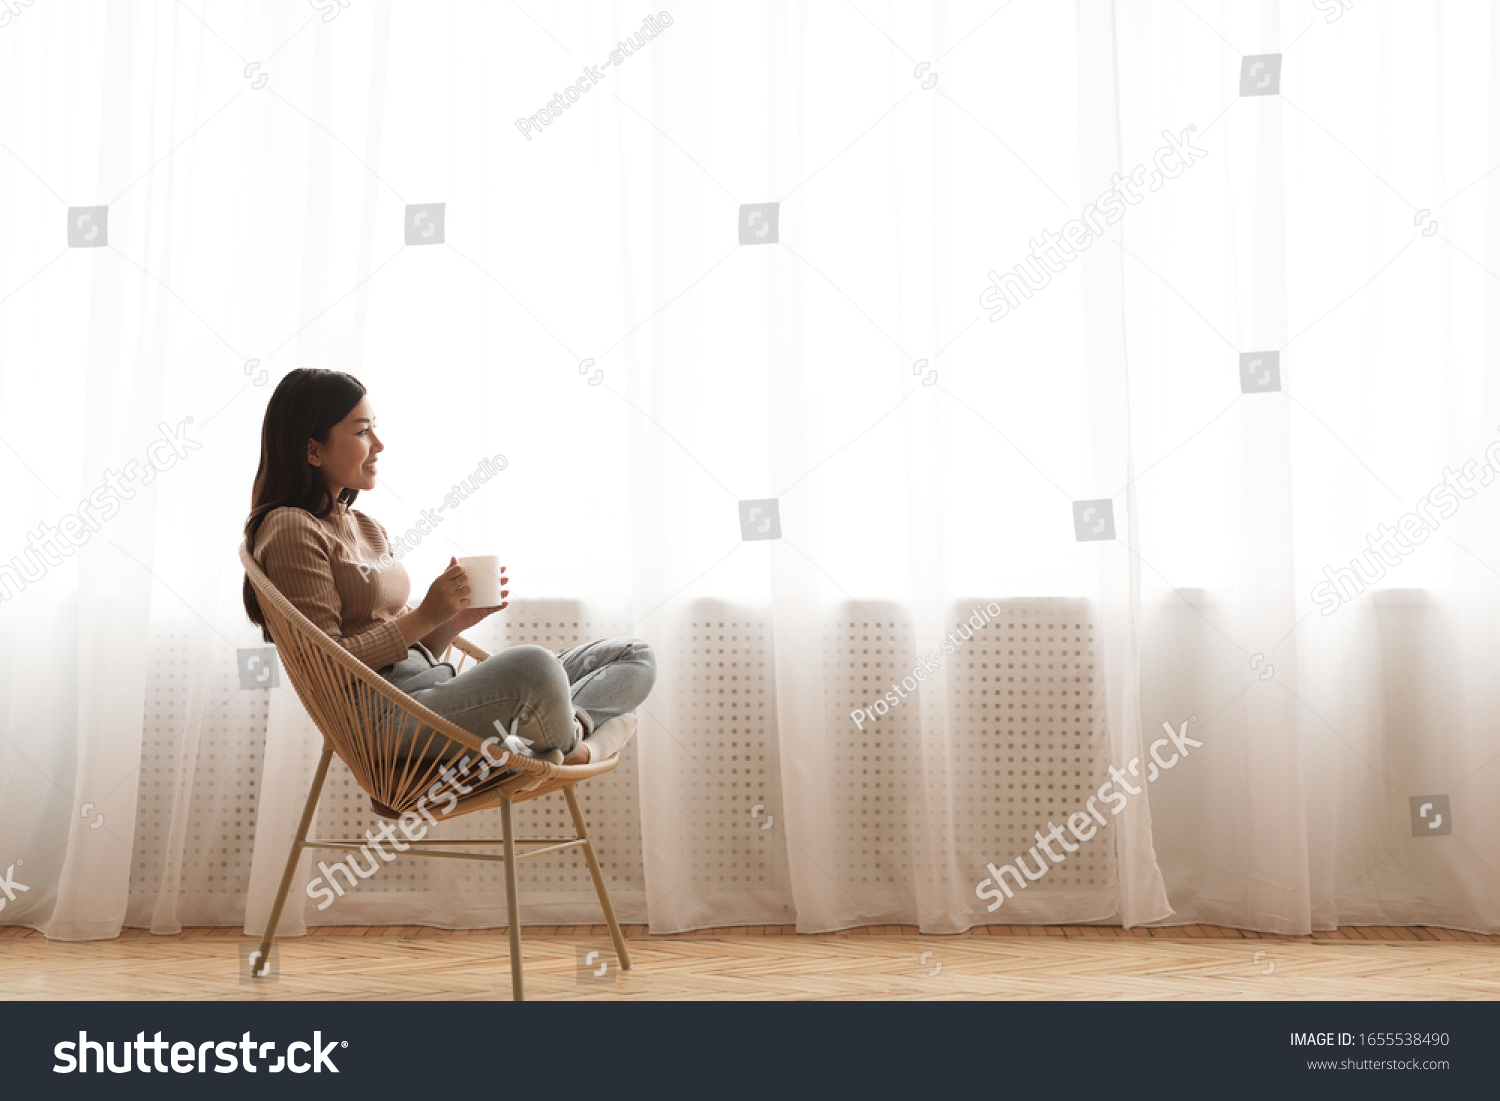 Tea time. Relaxed girl sitting in modern chair, enjoying hot coffee in front of window, side view, free space #1655538490